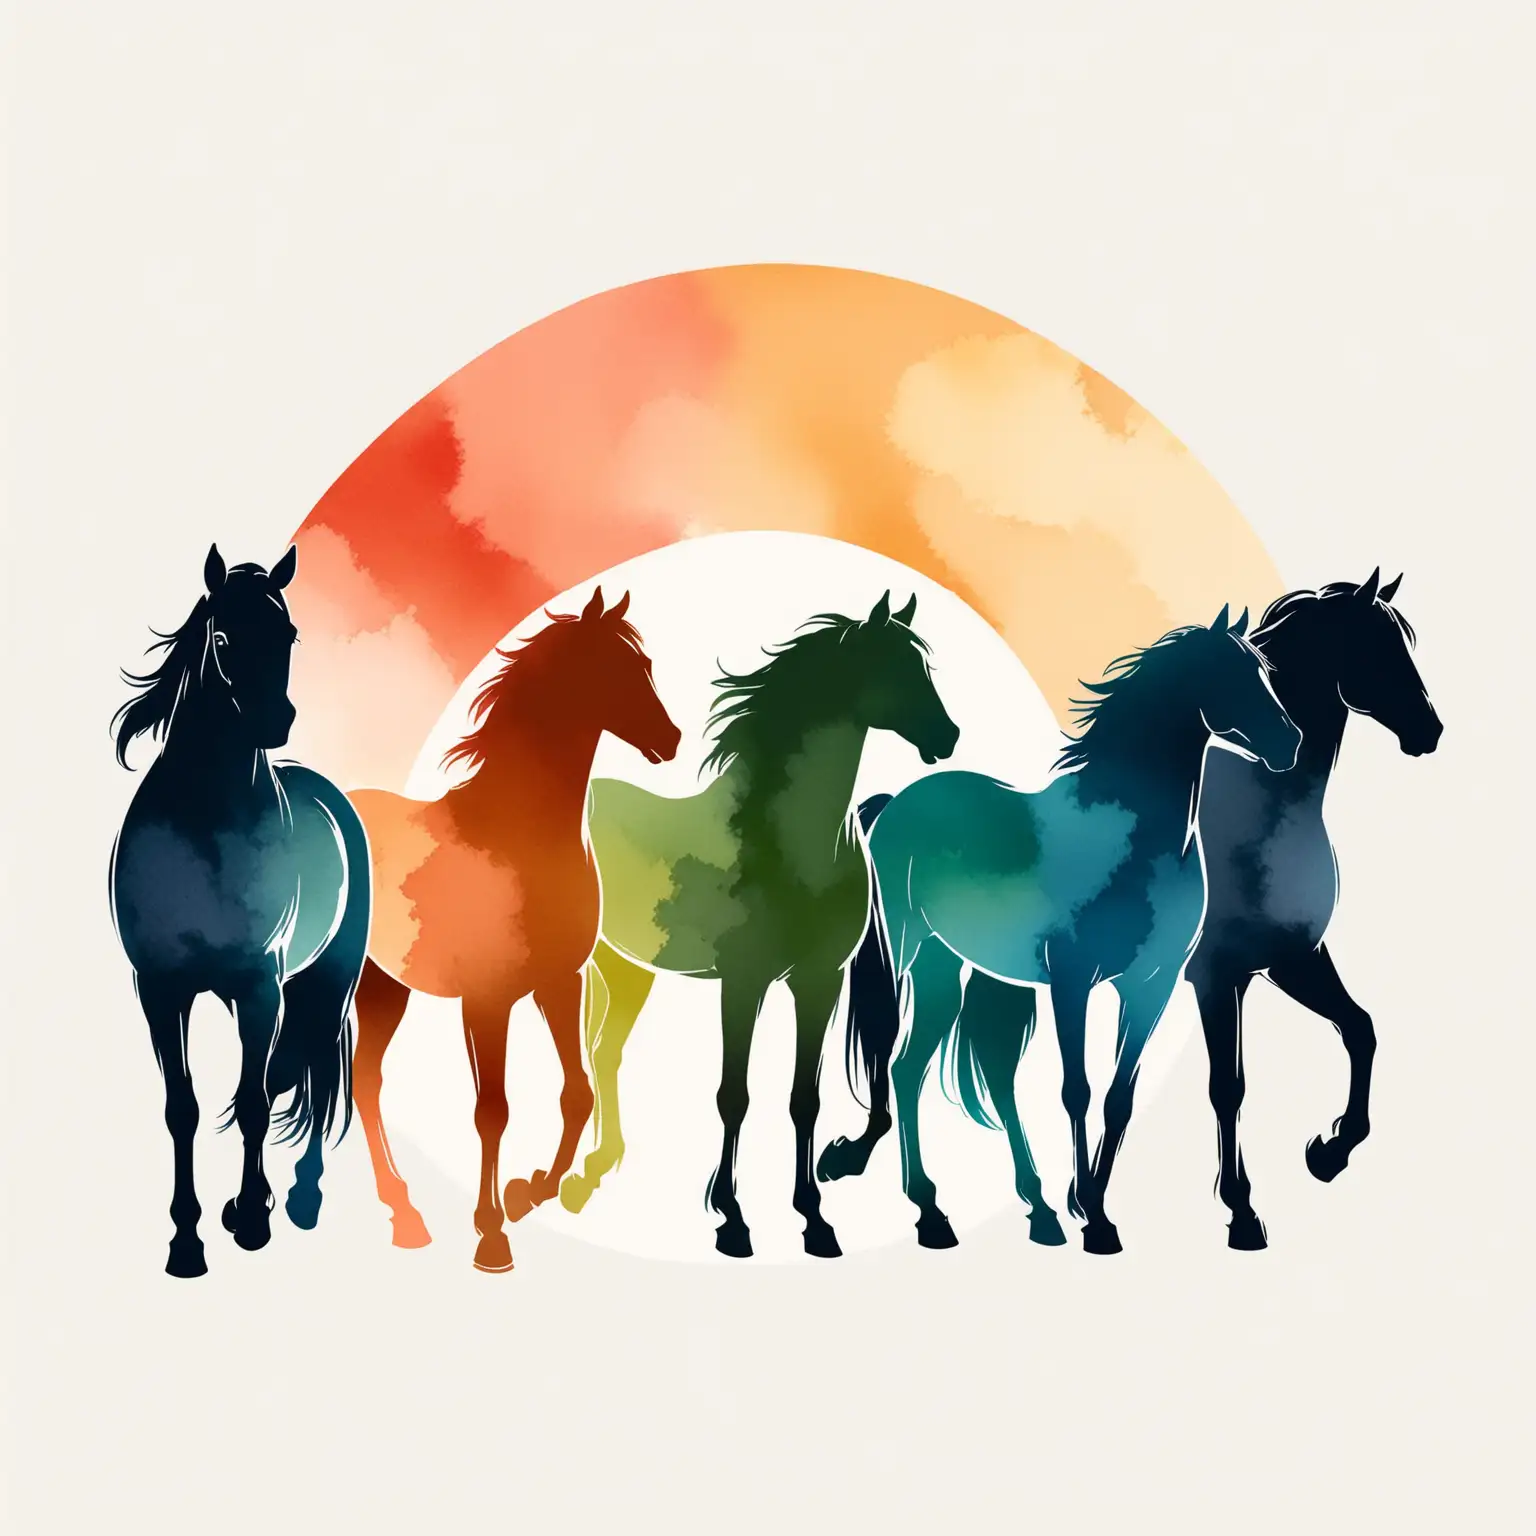 Elegant Vector Illustration of Four Horses in Abstract Silhouettes